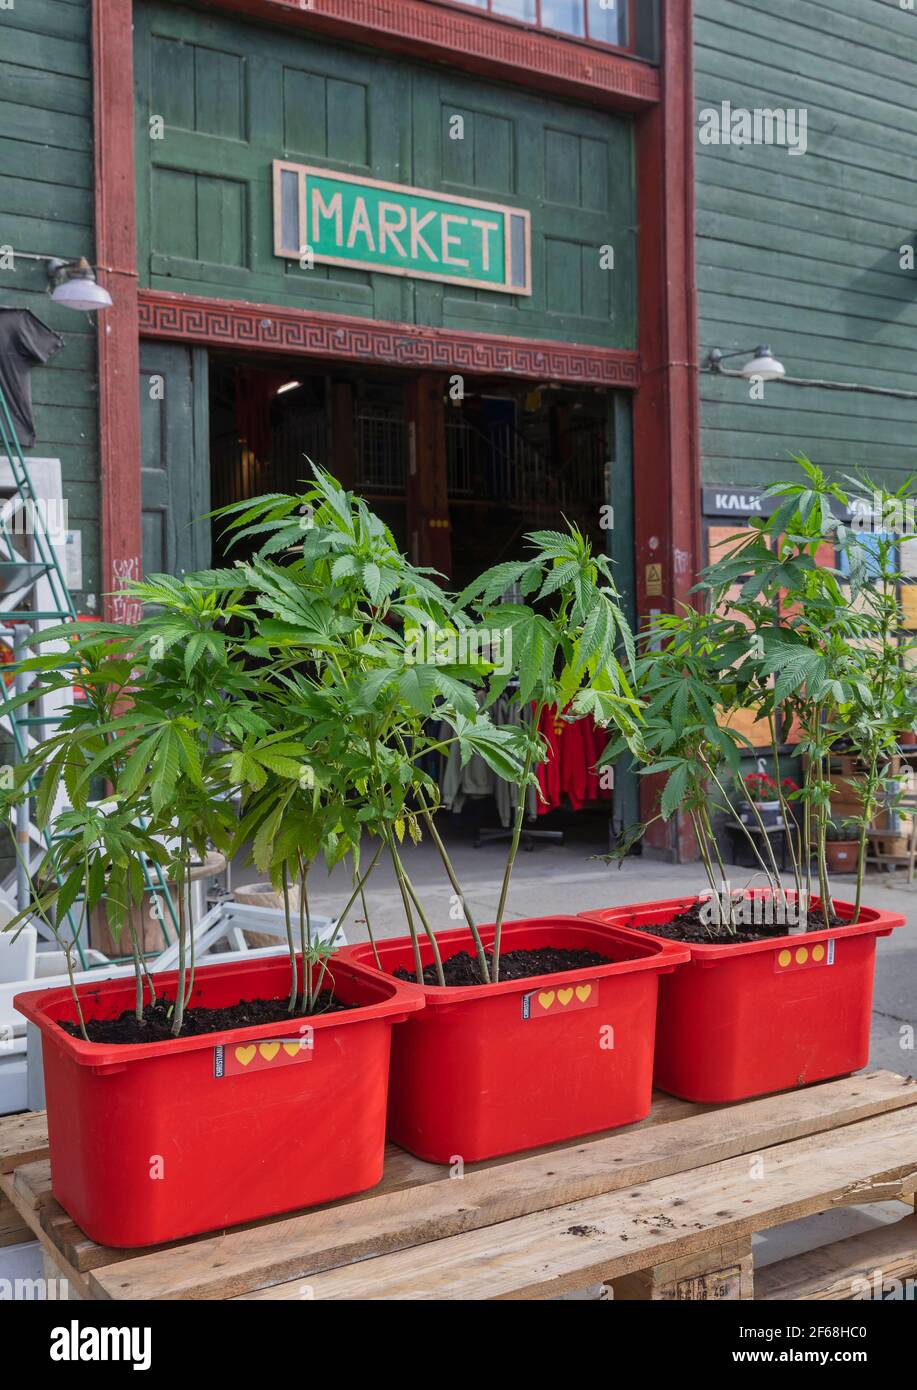 Freetown Christiania. A shop selling cannabis plants Stock Photo